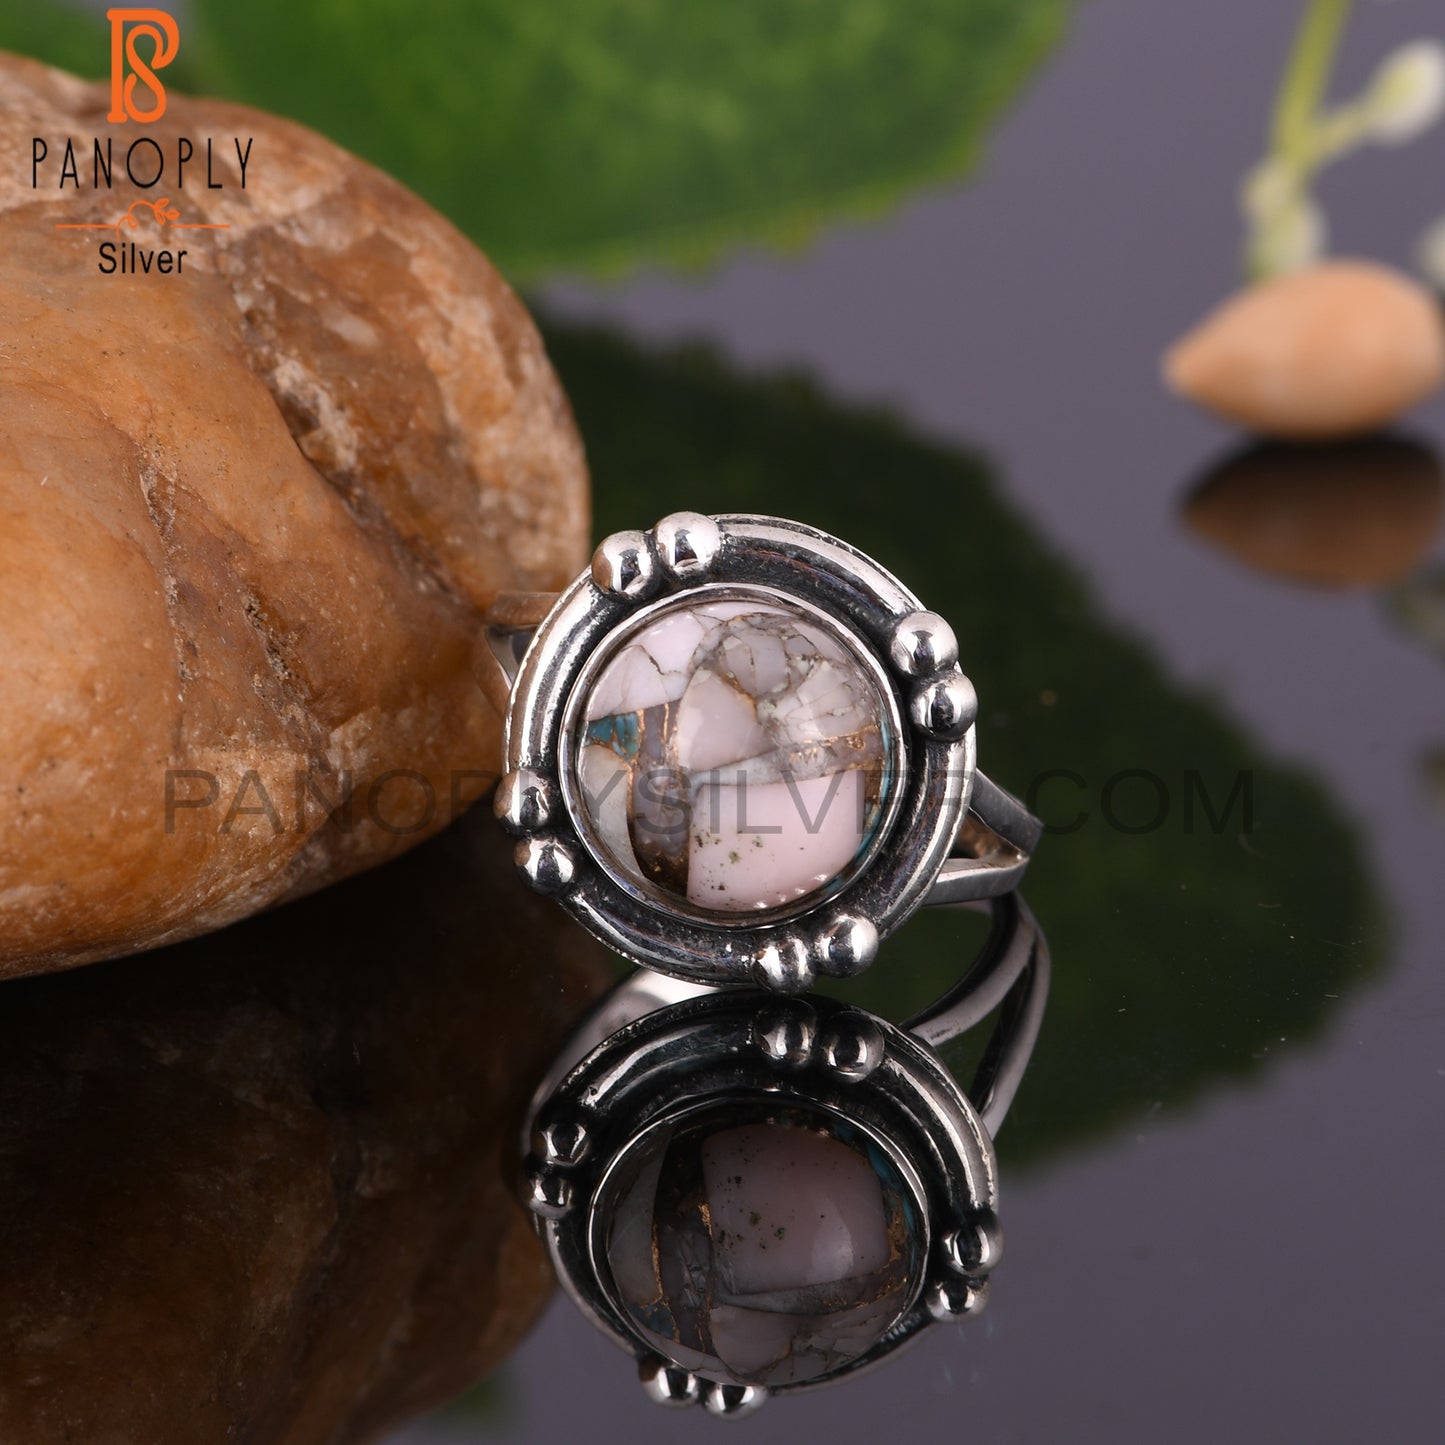 Mojave Pink Turquoise Round Shape 925 Silver Ring